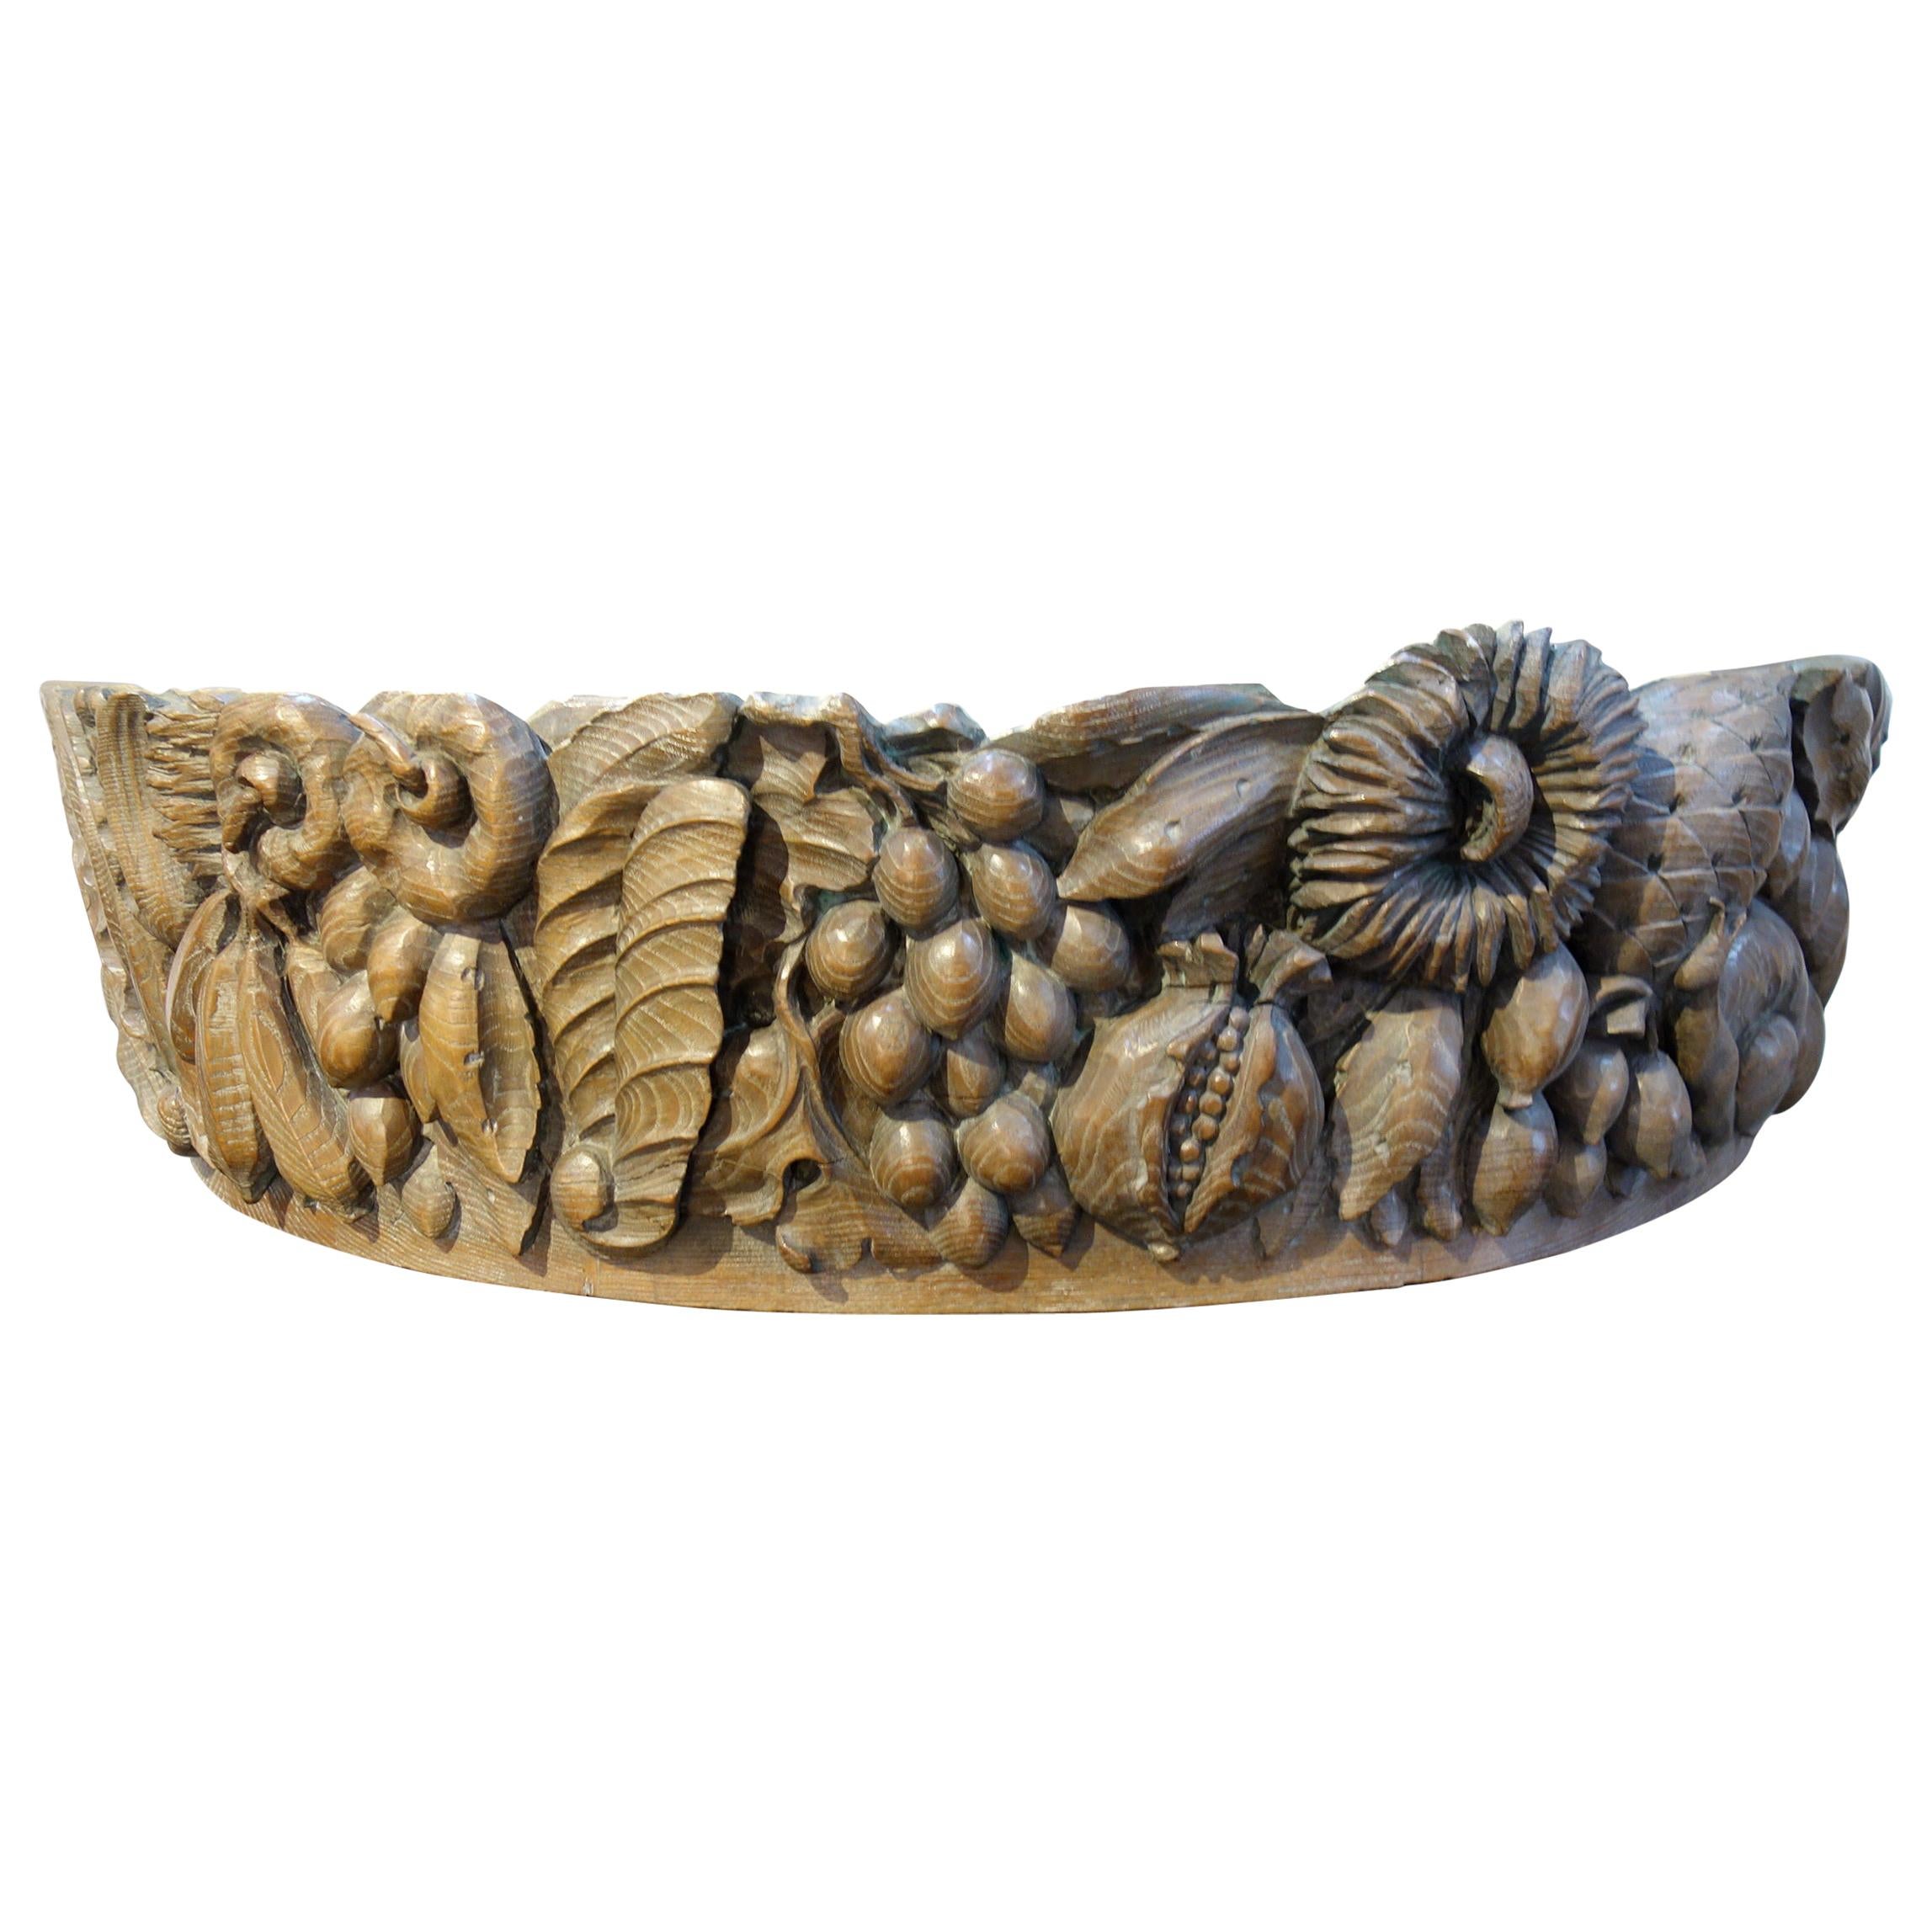 Italian Baroque Style Carved Capital Frieze Architectural Element, circa 1840